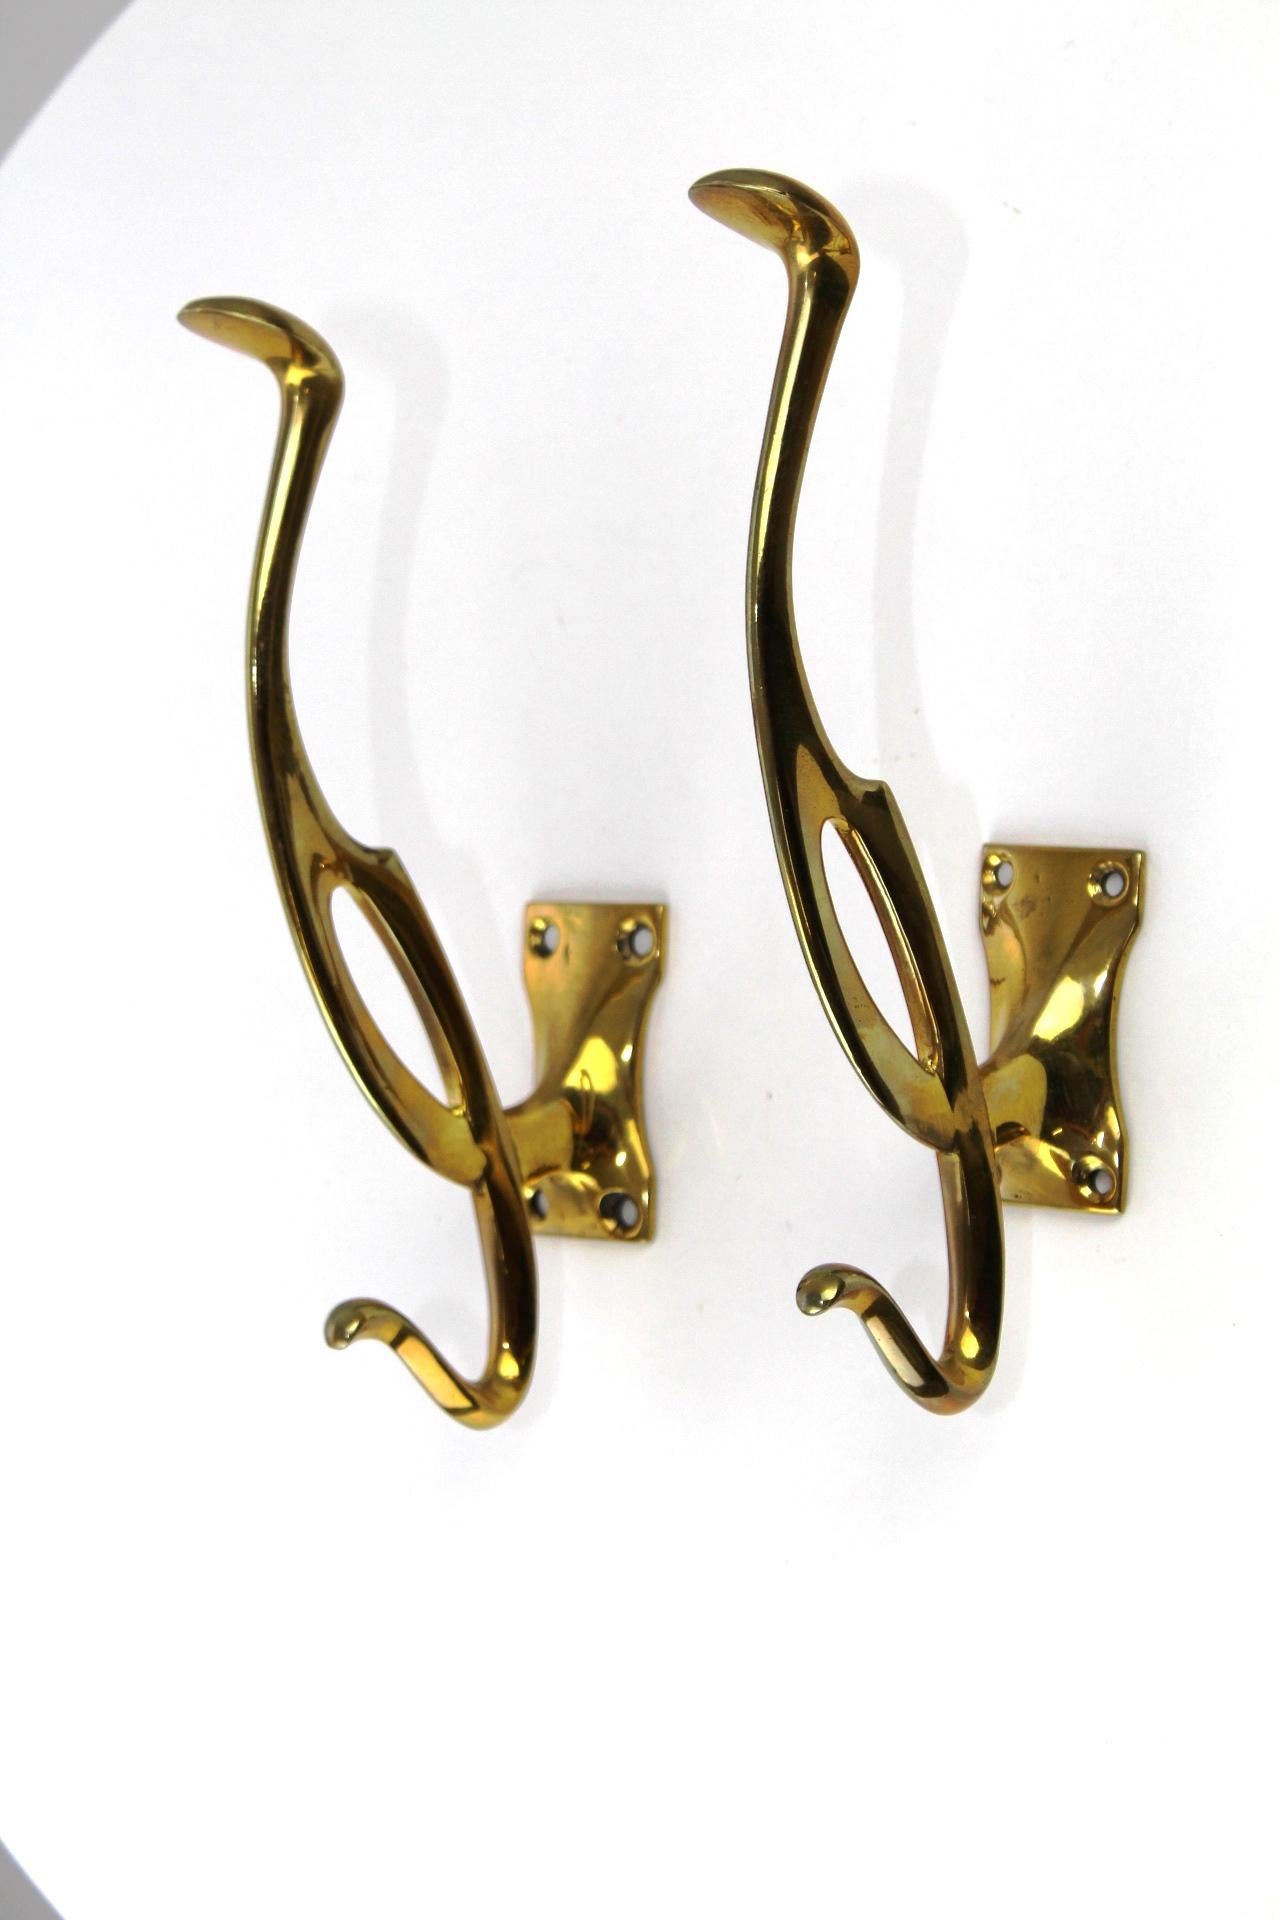 these are original art nouveau hooks, made of solid cast brass in the style of Henry Van De Velde, original pieces from around 1900, 2 big hooks are 20 cm high, 10 cm deep and 3 cm wide, the 3 small hooks are 3.6 cm high, 3 cm wide, and 4 cm deep.